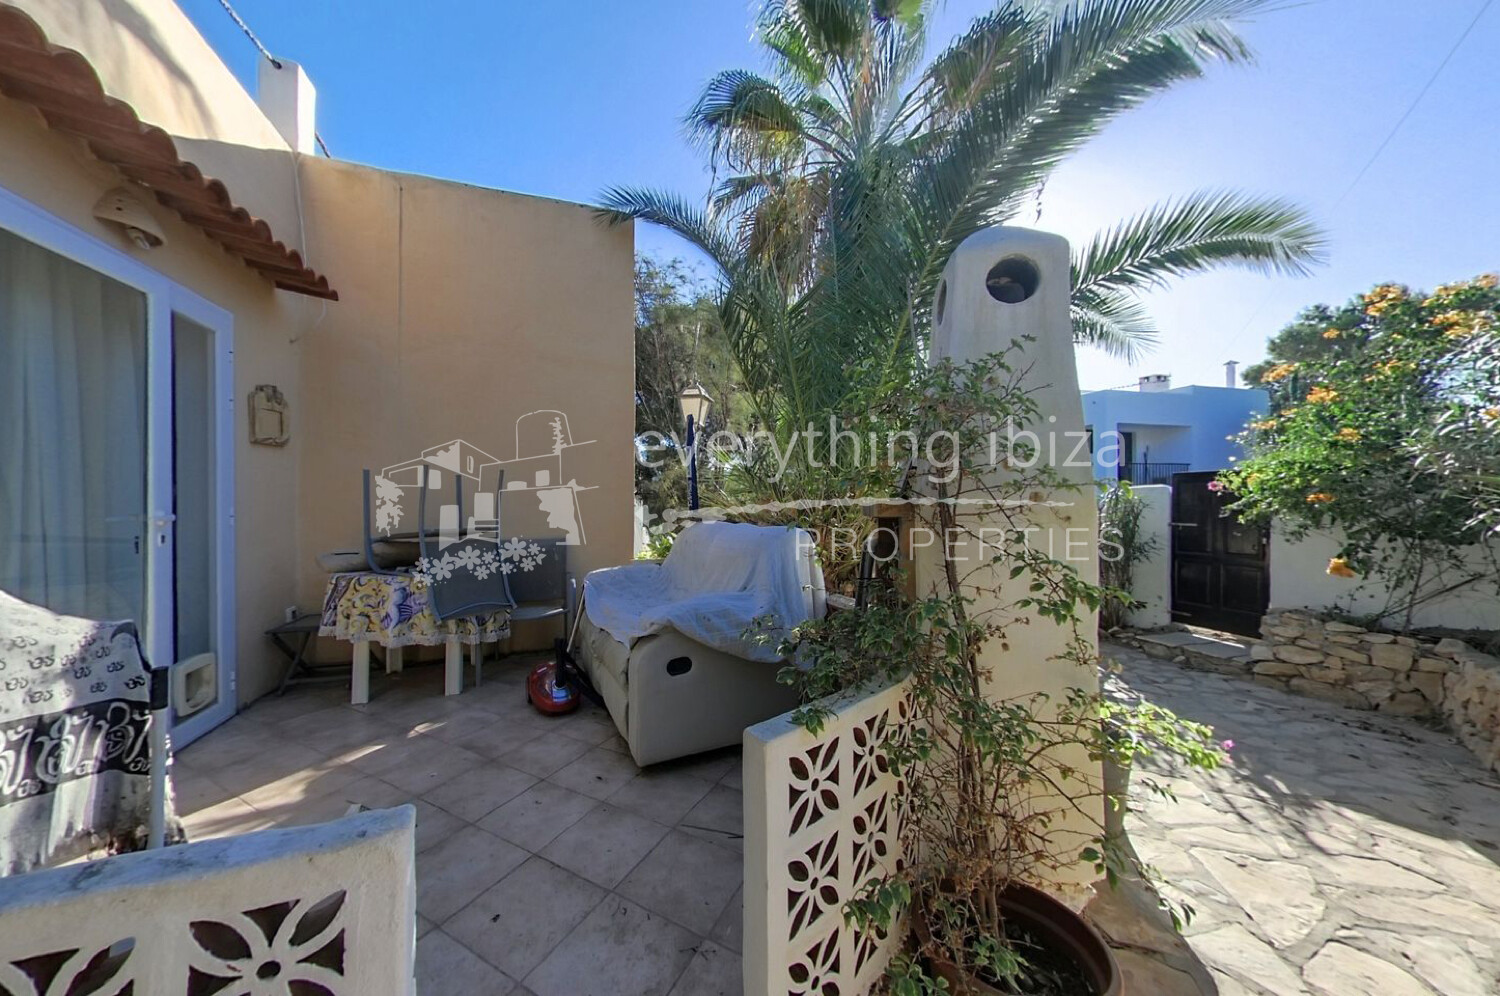 Homely Detached House in Sought After Cala Vadella, ref. 1621, for sale in Ibiza by everything ibiza Properties